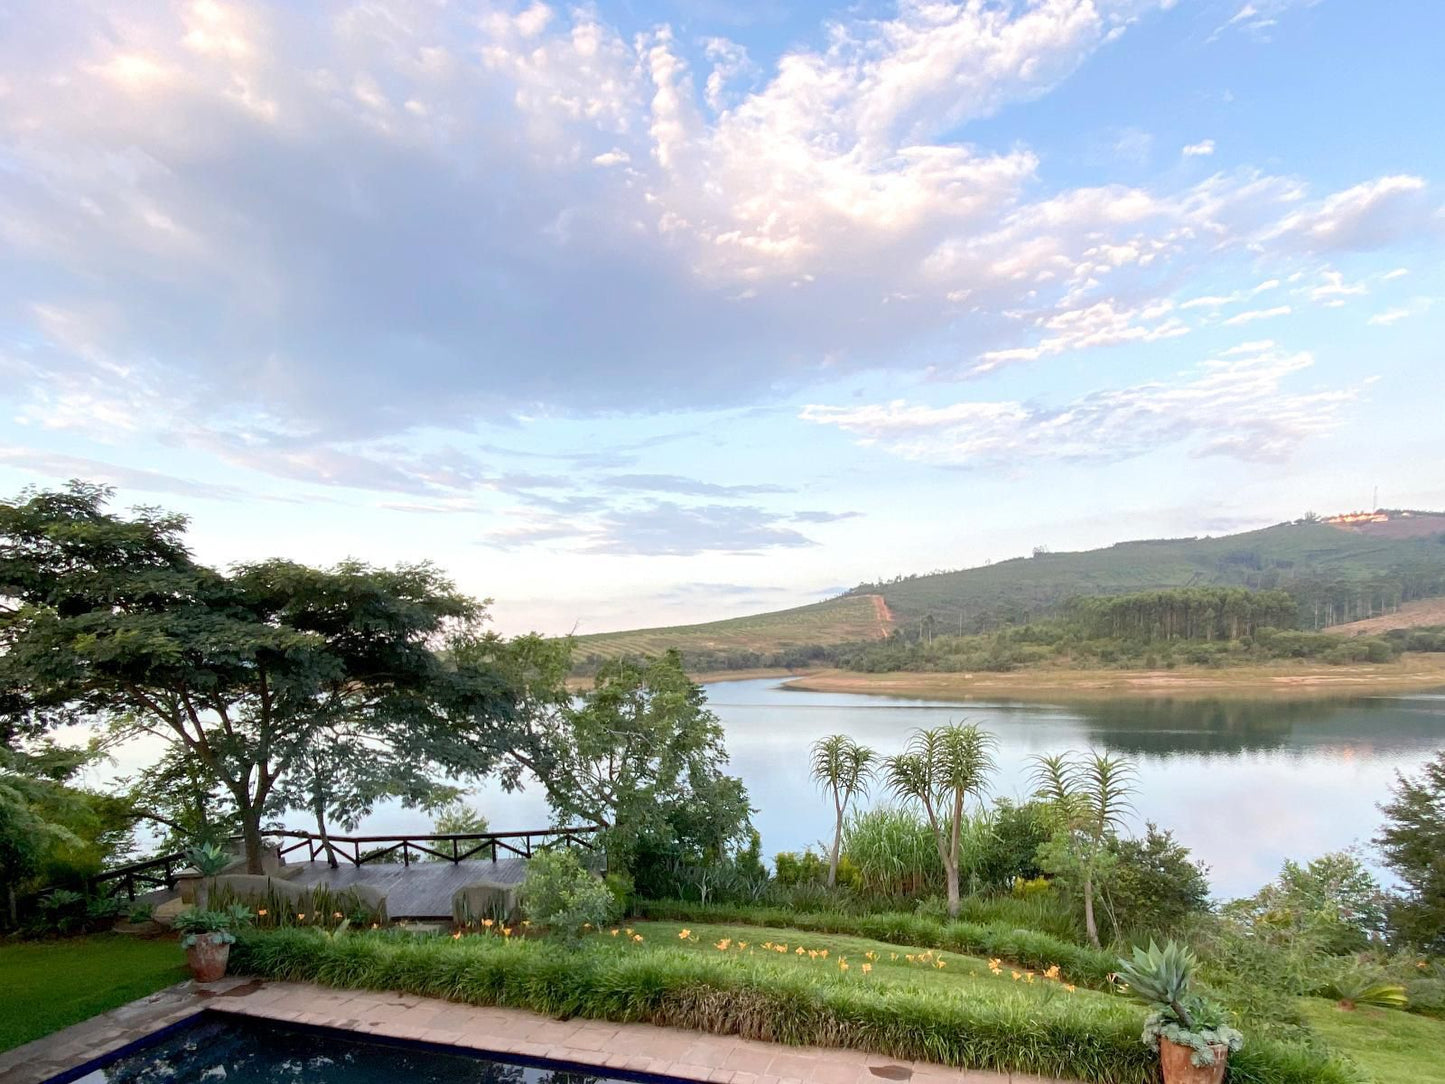 Tinkers Lakeside Lodge Hazyview Mpumalanga South Africa Complementary Colors, Lake, Nature, Waters